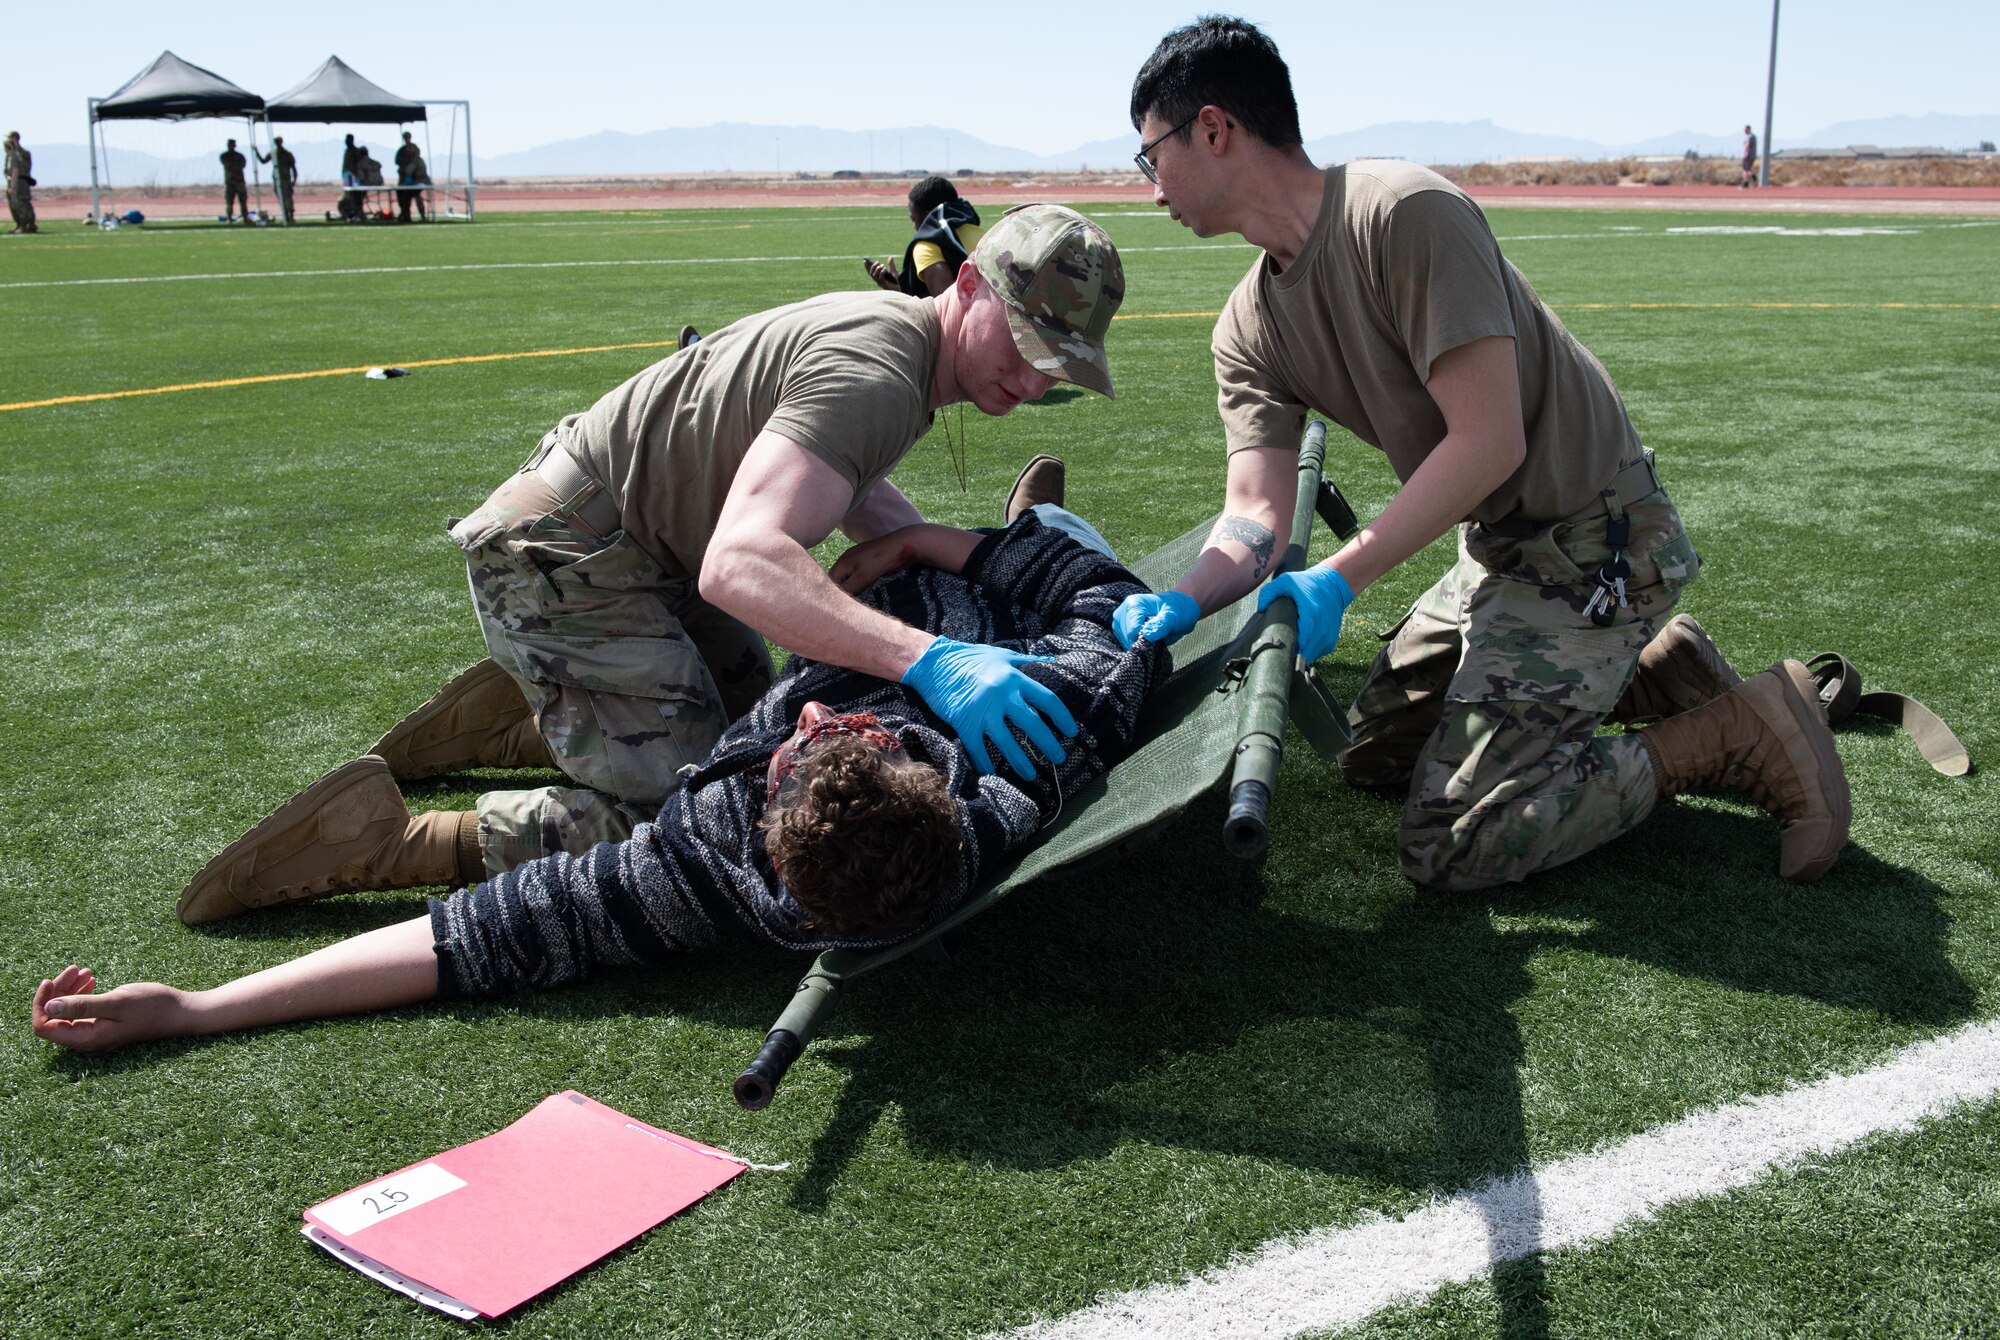 Airmen lift a simulated patient onto a stretcher.